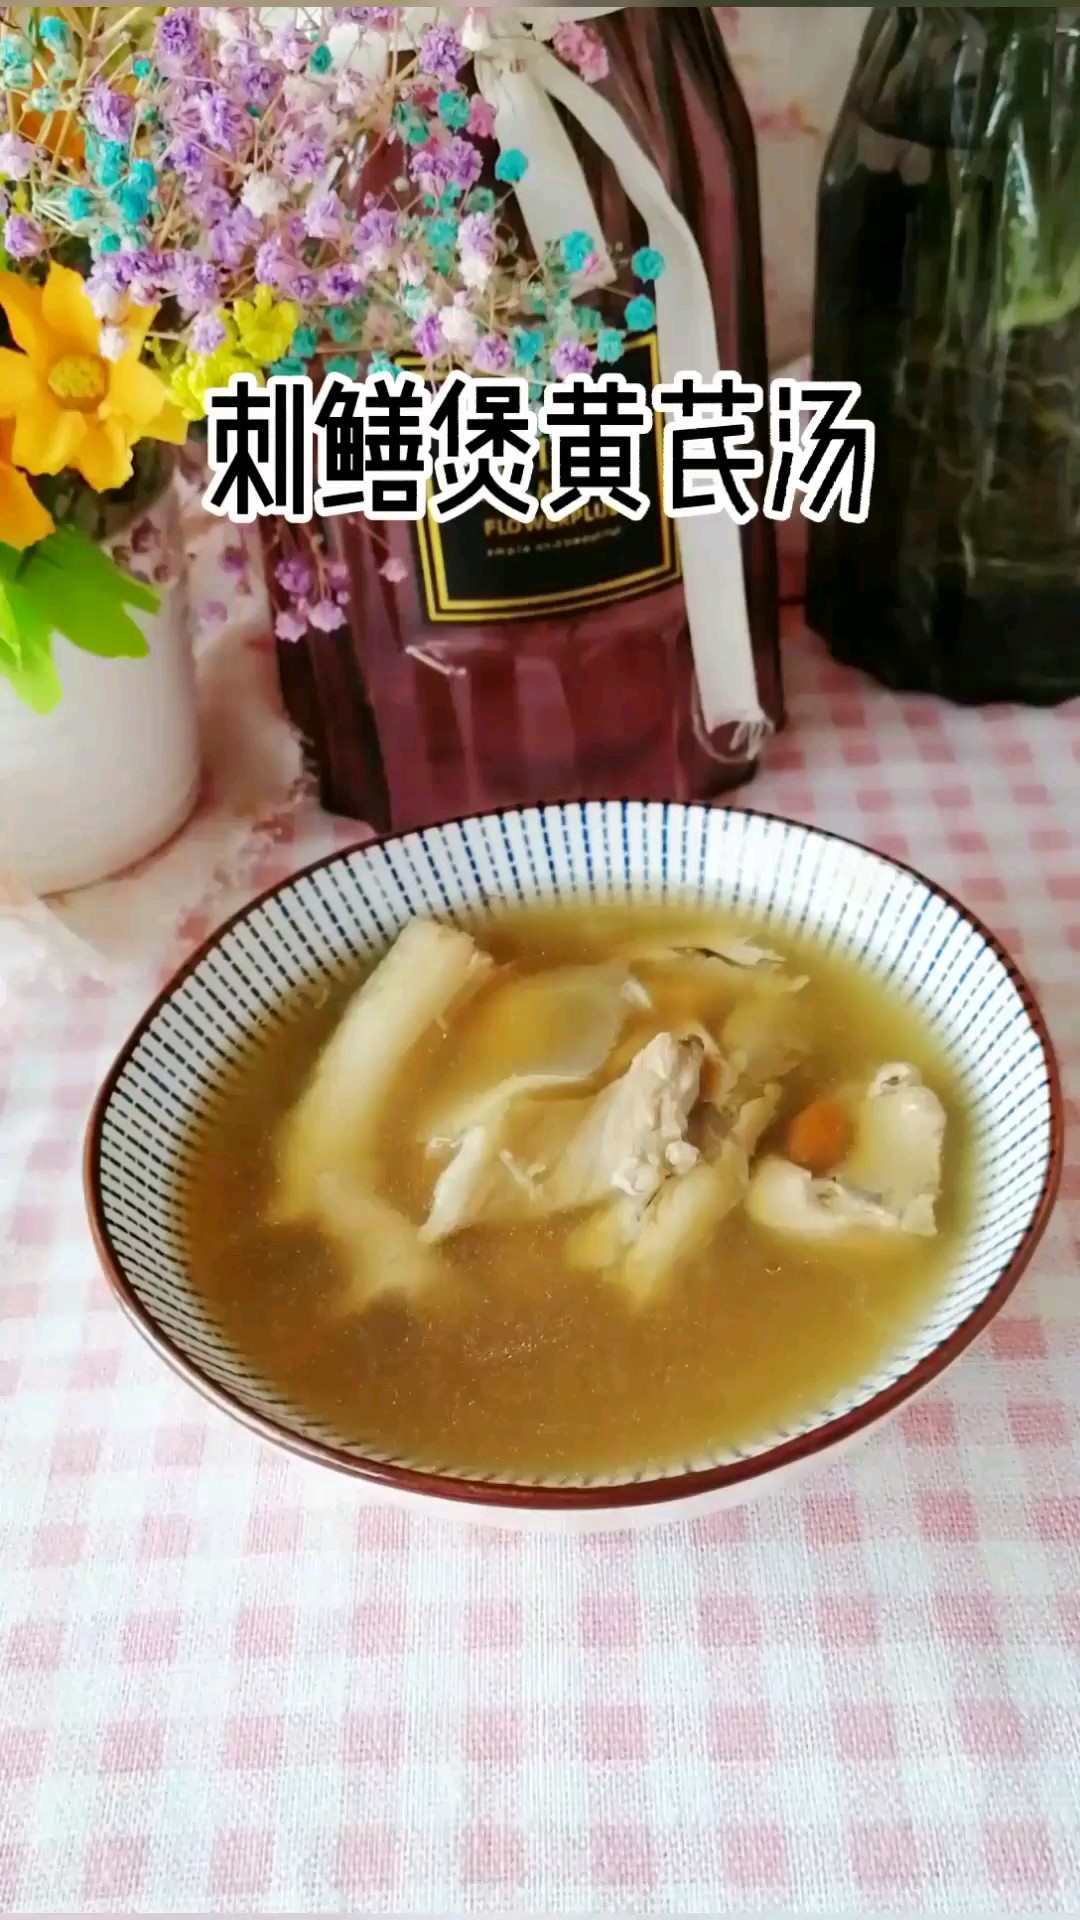 Eel and Astragalus Soup recipe